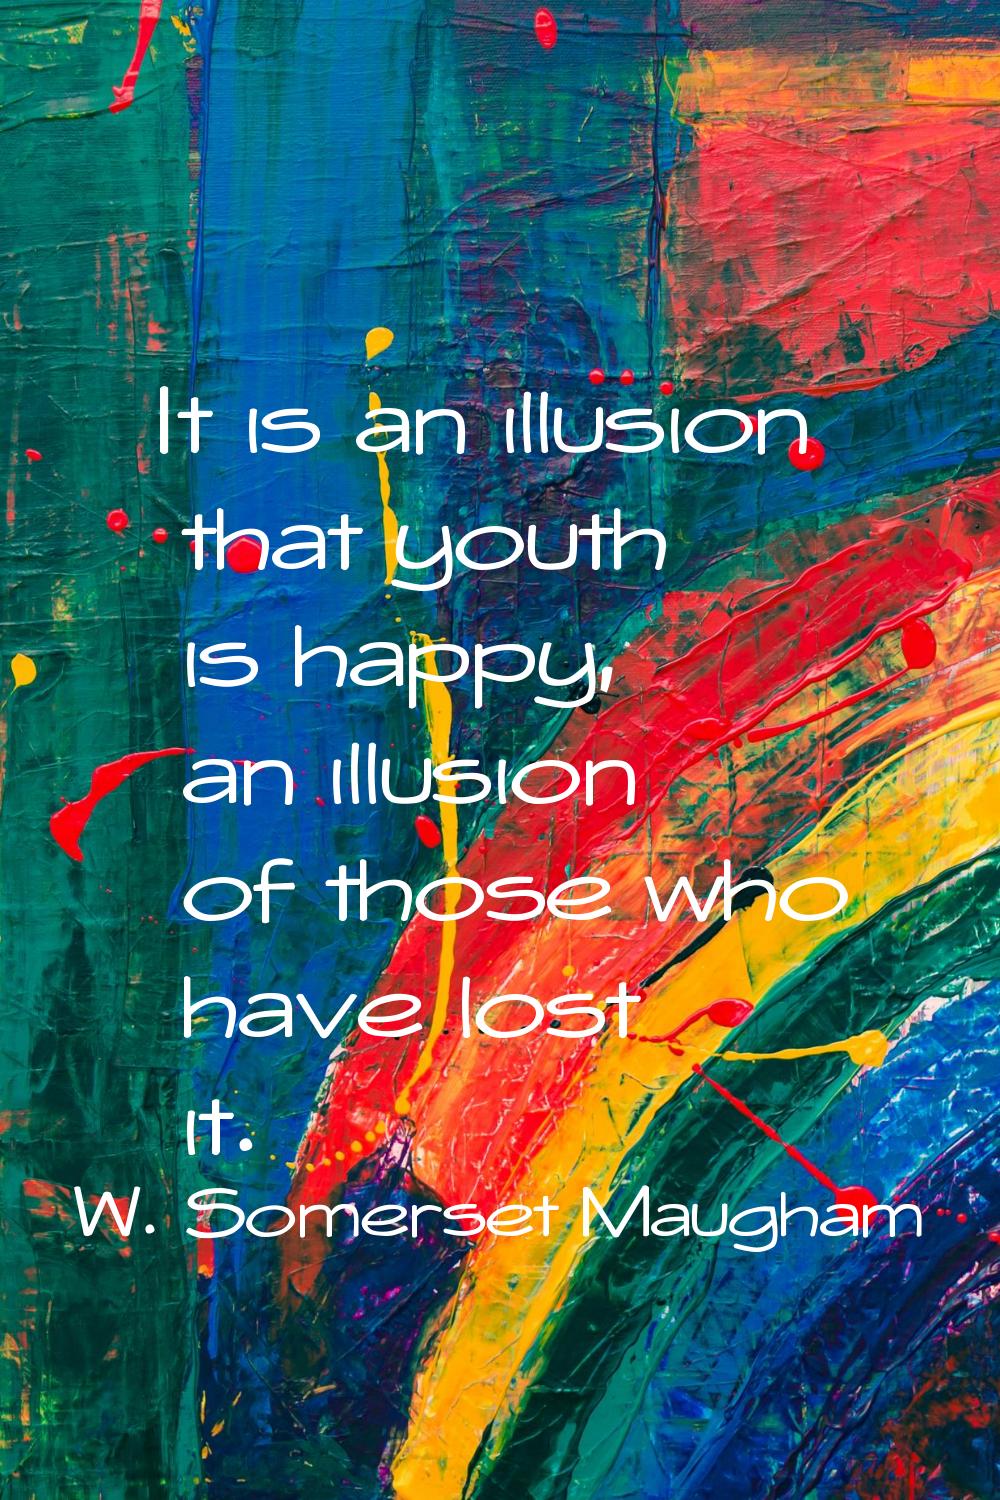 It is an illusion that youth is happy, an illusion of those who have lost it.